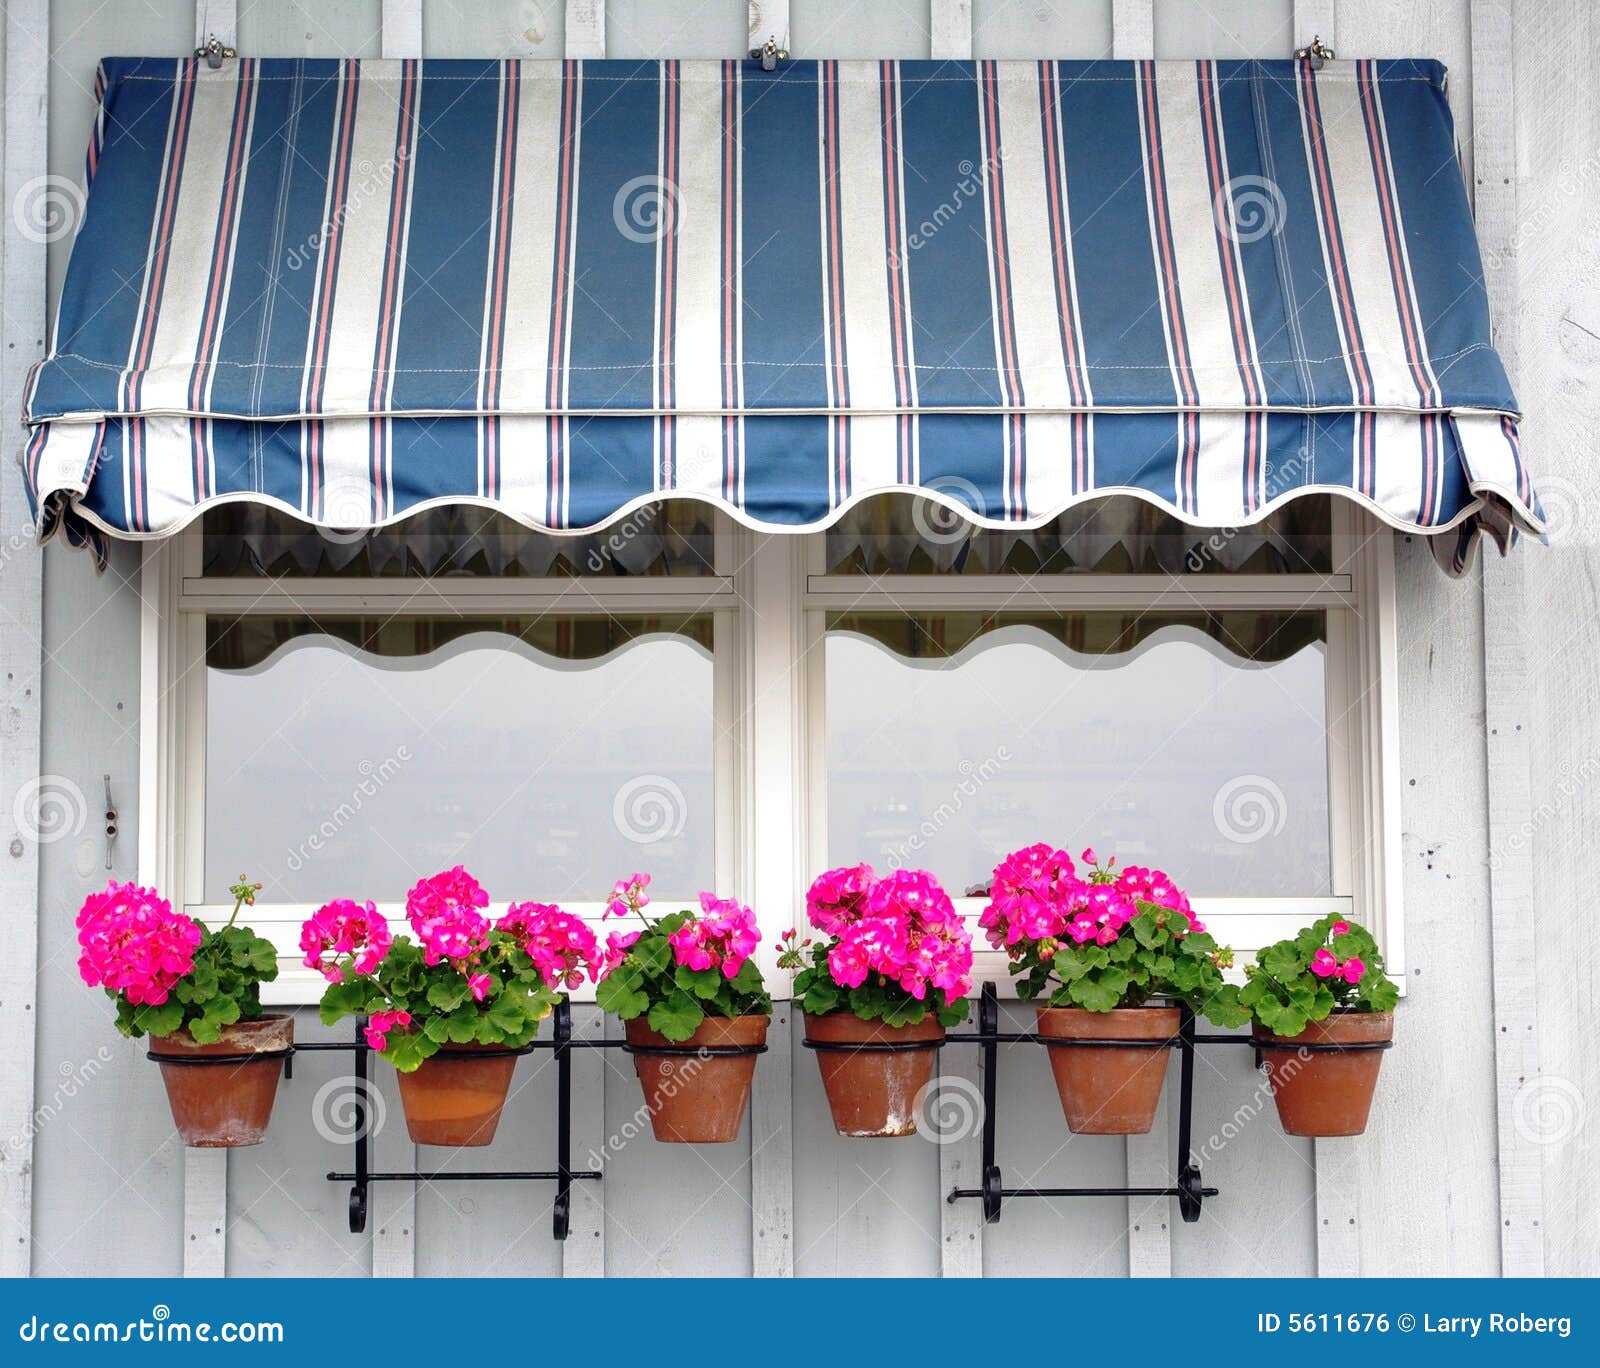 awning with flowers